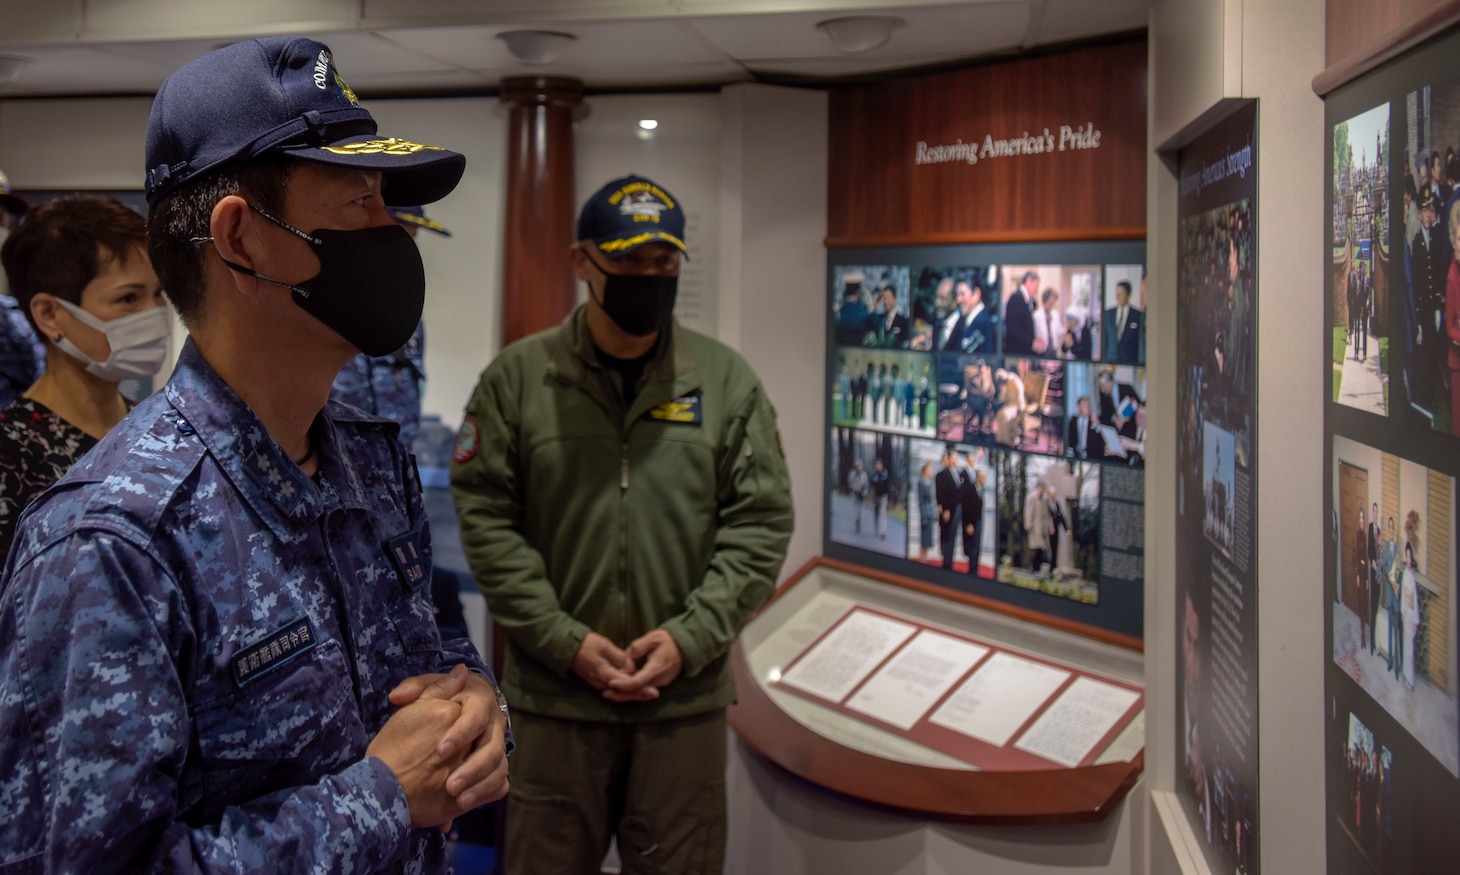 210415-N-WS494-1103 YOKOSUKA, Japan (April 15, 2021) Vice Adm. SAITO Akira, commander of Japan Maritime Self-Defense Force (JMSDF) Fleet Escort Force, receives a tour of the ship’s museum from  Capt. Fred Goldhammer, commanding officer, aboard the U.S. Navy’s only forward-deployed aircraft carrier USS Ronald Reagan (CVN 76). Carrier Strike Group (CSG) 5 and Task Force 71 met with the commander of JMSDF Fleet Escort Force aboard Ronald Reagan for ship tour and staff discussions. Ronald Reagan, the flagship of CSG 5, provides a combat-ready force that protects and defends the United States, as well as the collective maritime interests of its allies and partners in the Indo-Pacific region. (U.S. Navy Photo by Mass Communication Specialist 3rd Class Quinton A. Lee)